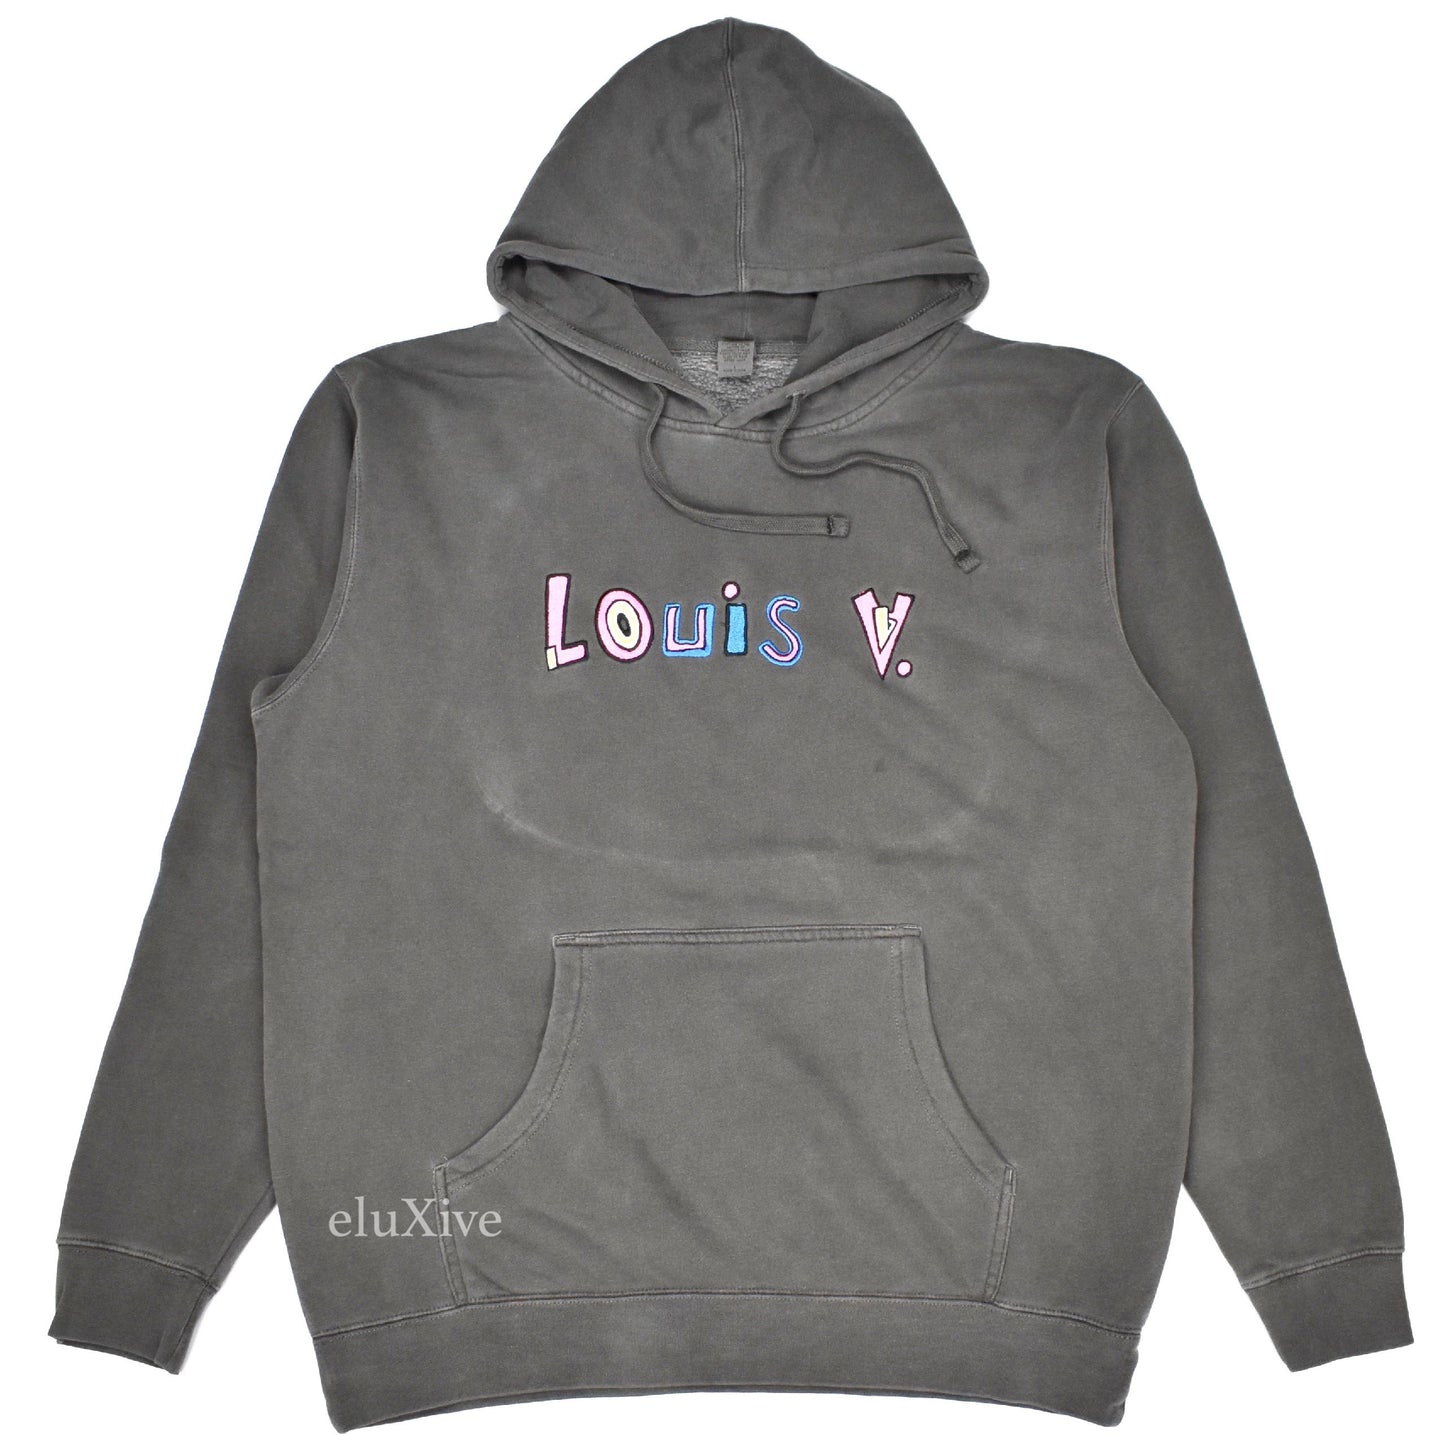 Mega Yacht - 'Louis V' Logo Embroidered Hoodie